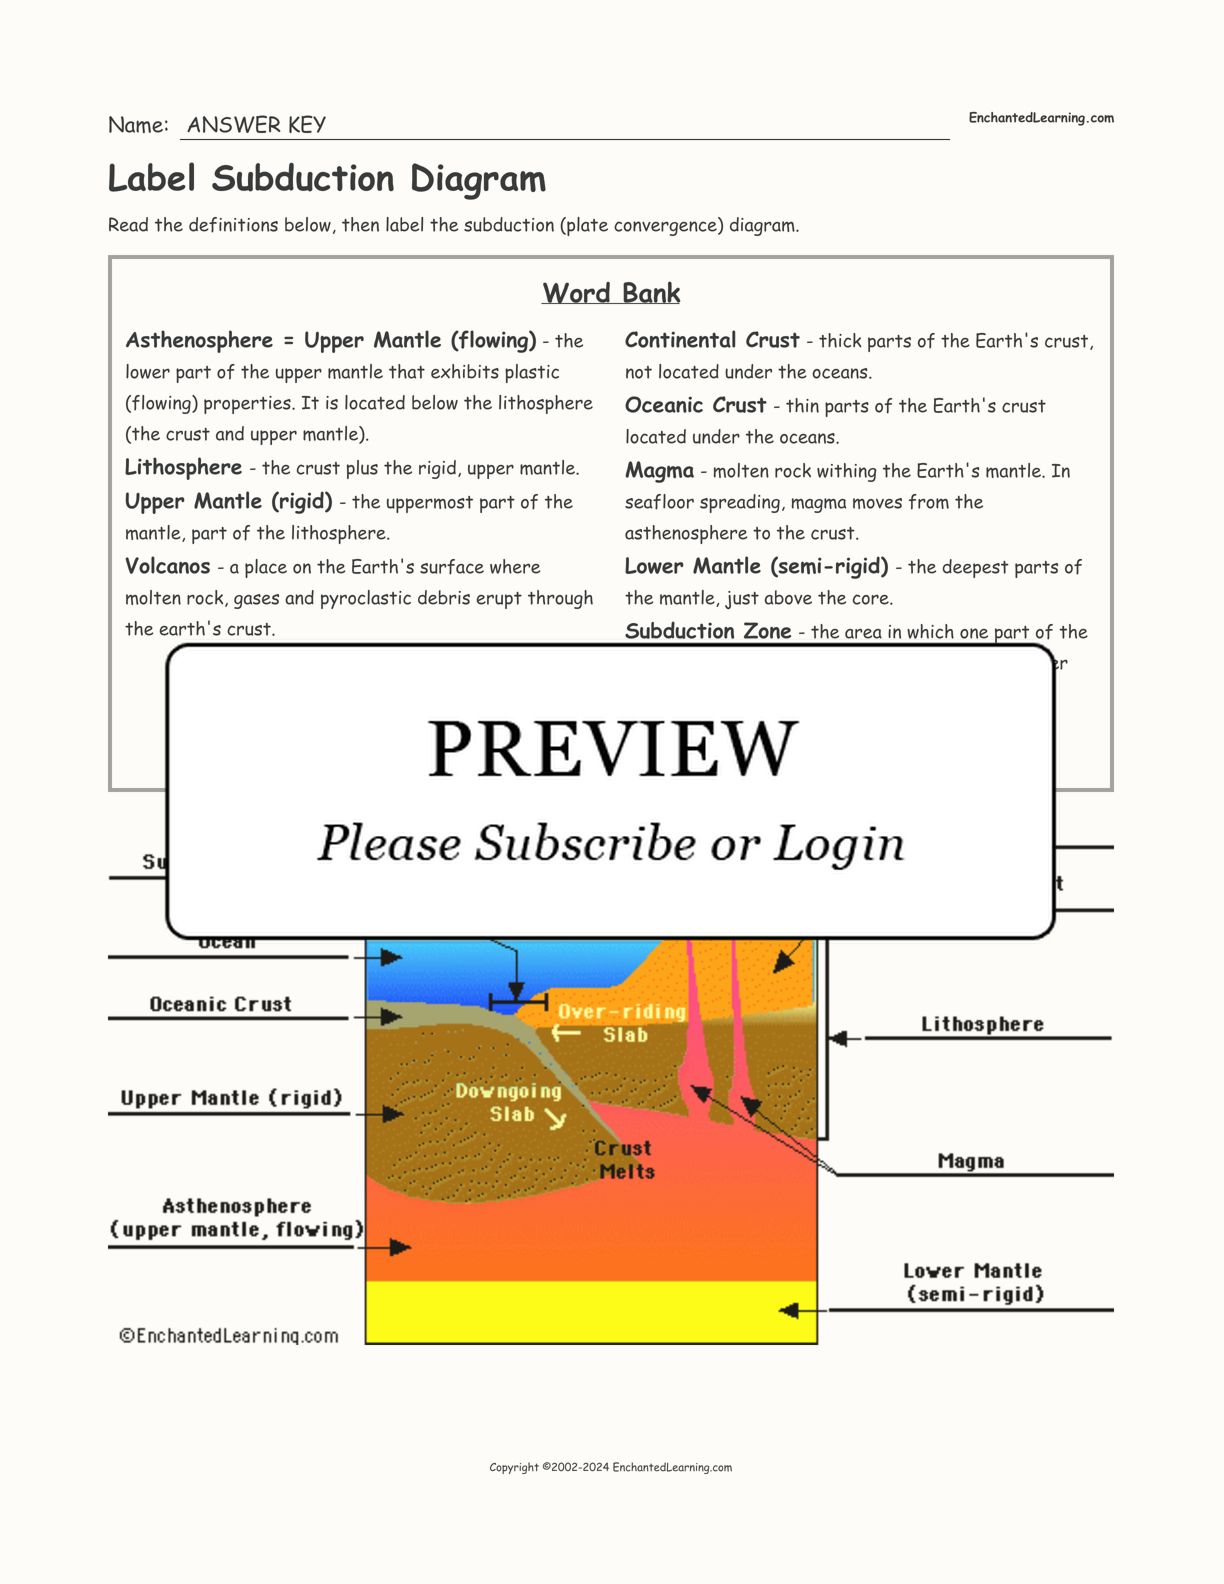 Label Subduction Diagram interactive worksheet page 2